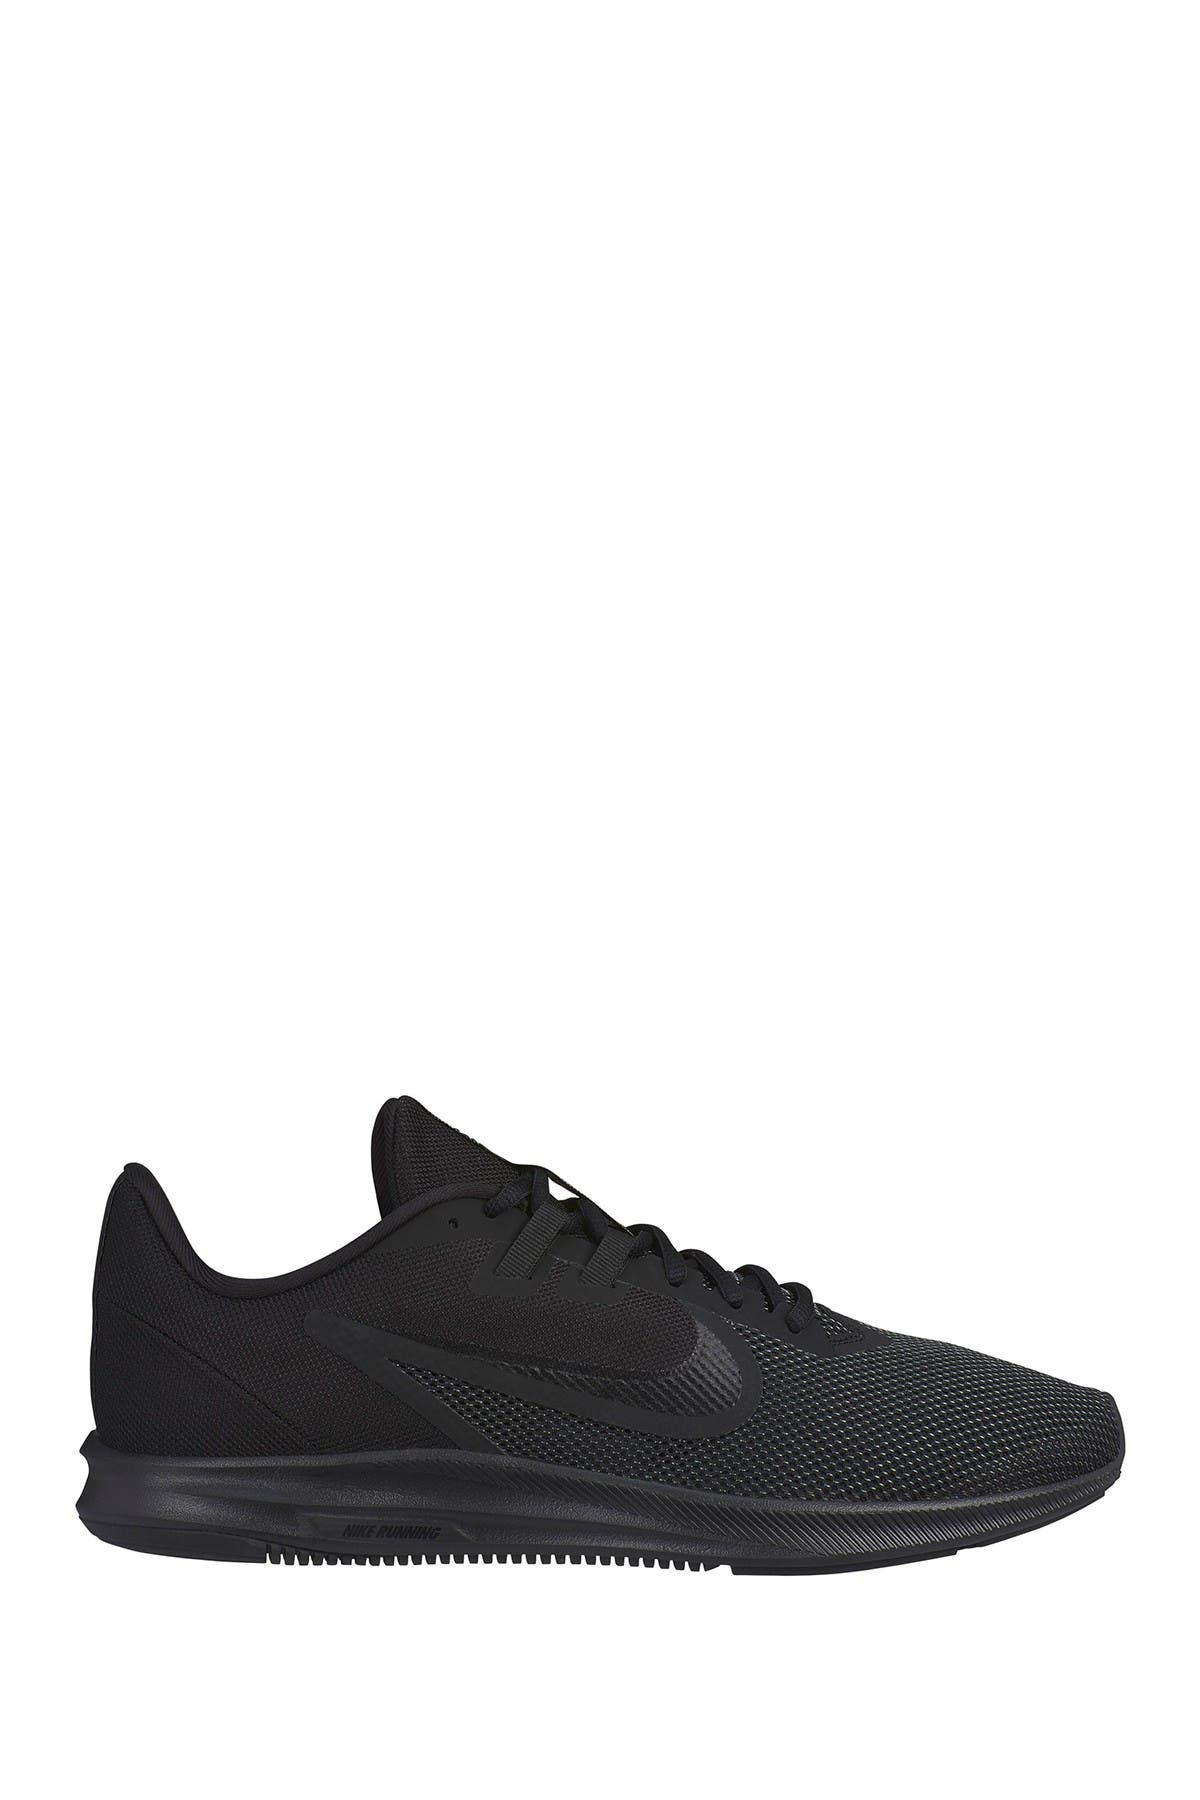 nike downshifter mens trainers